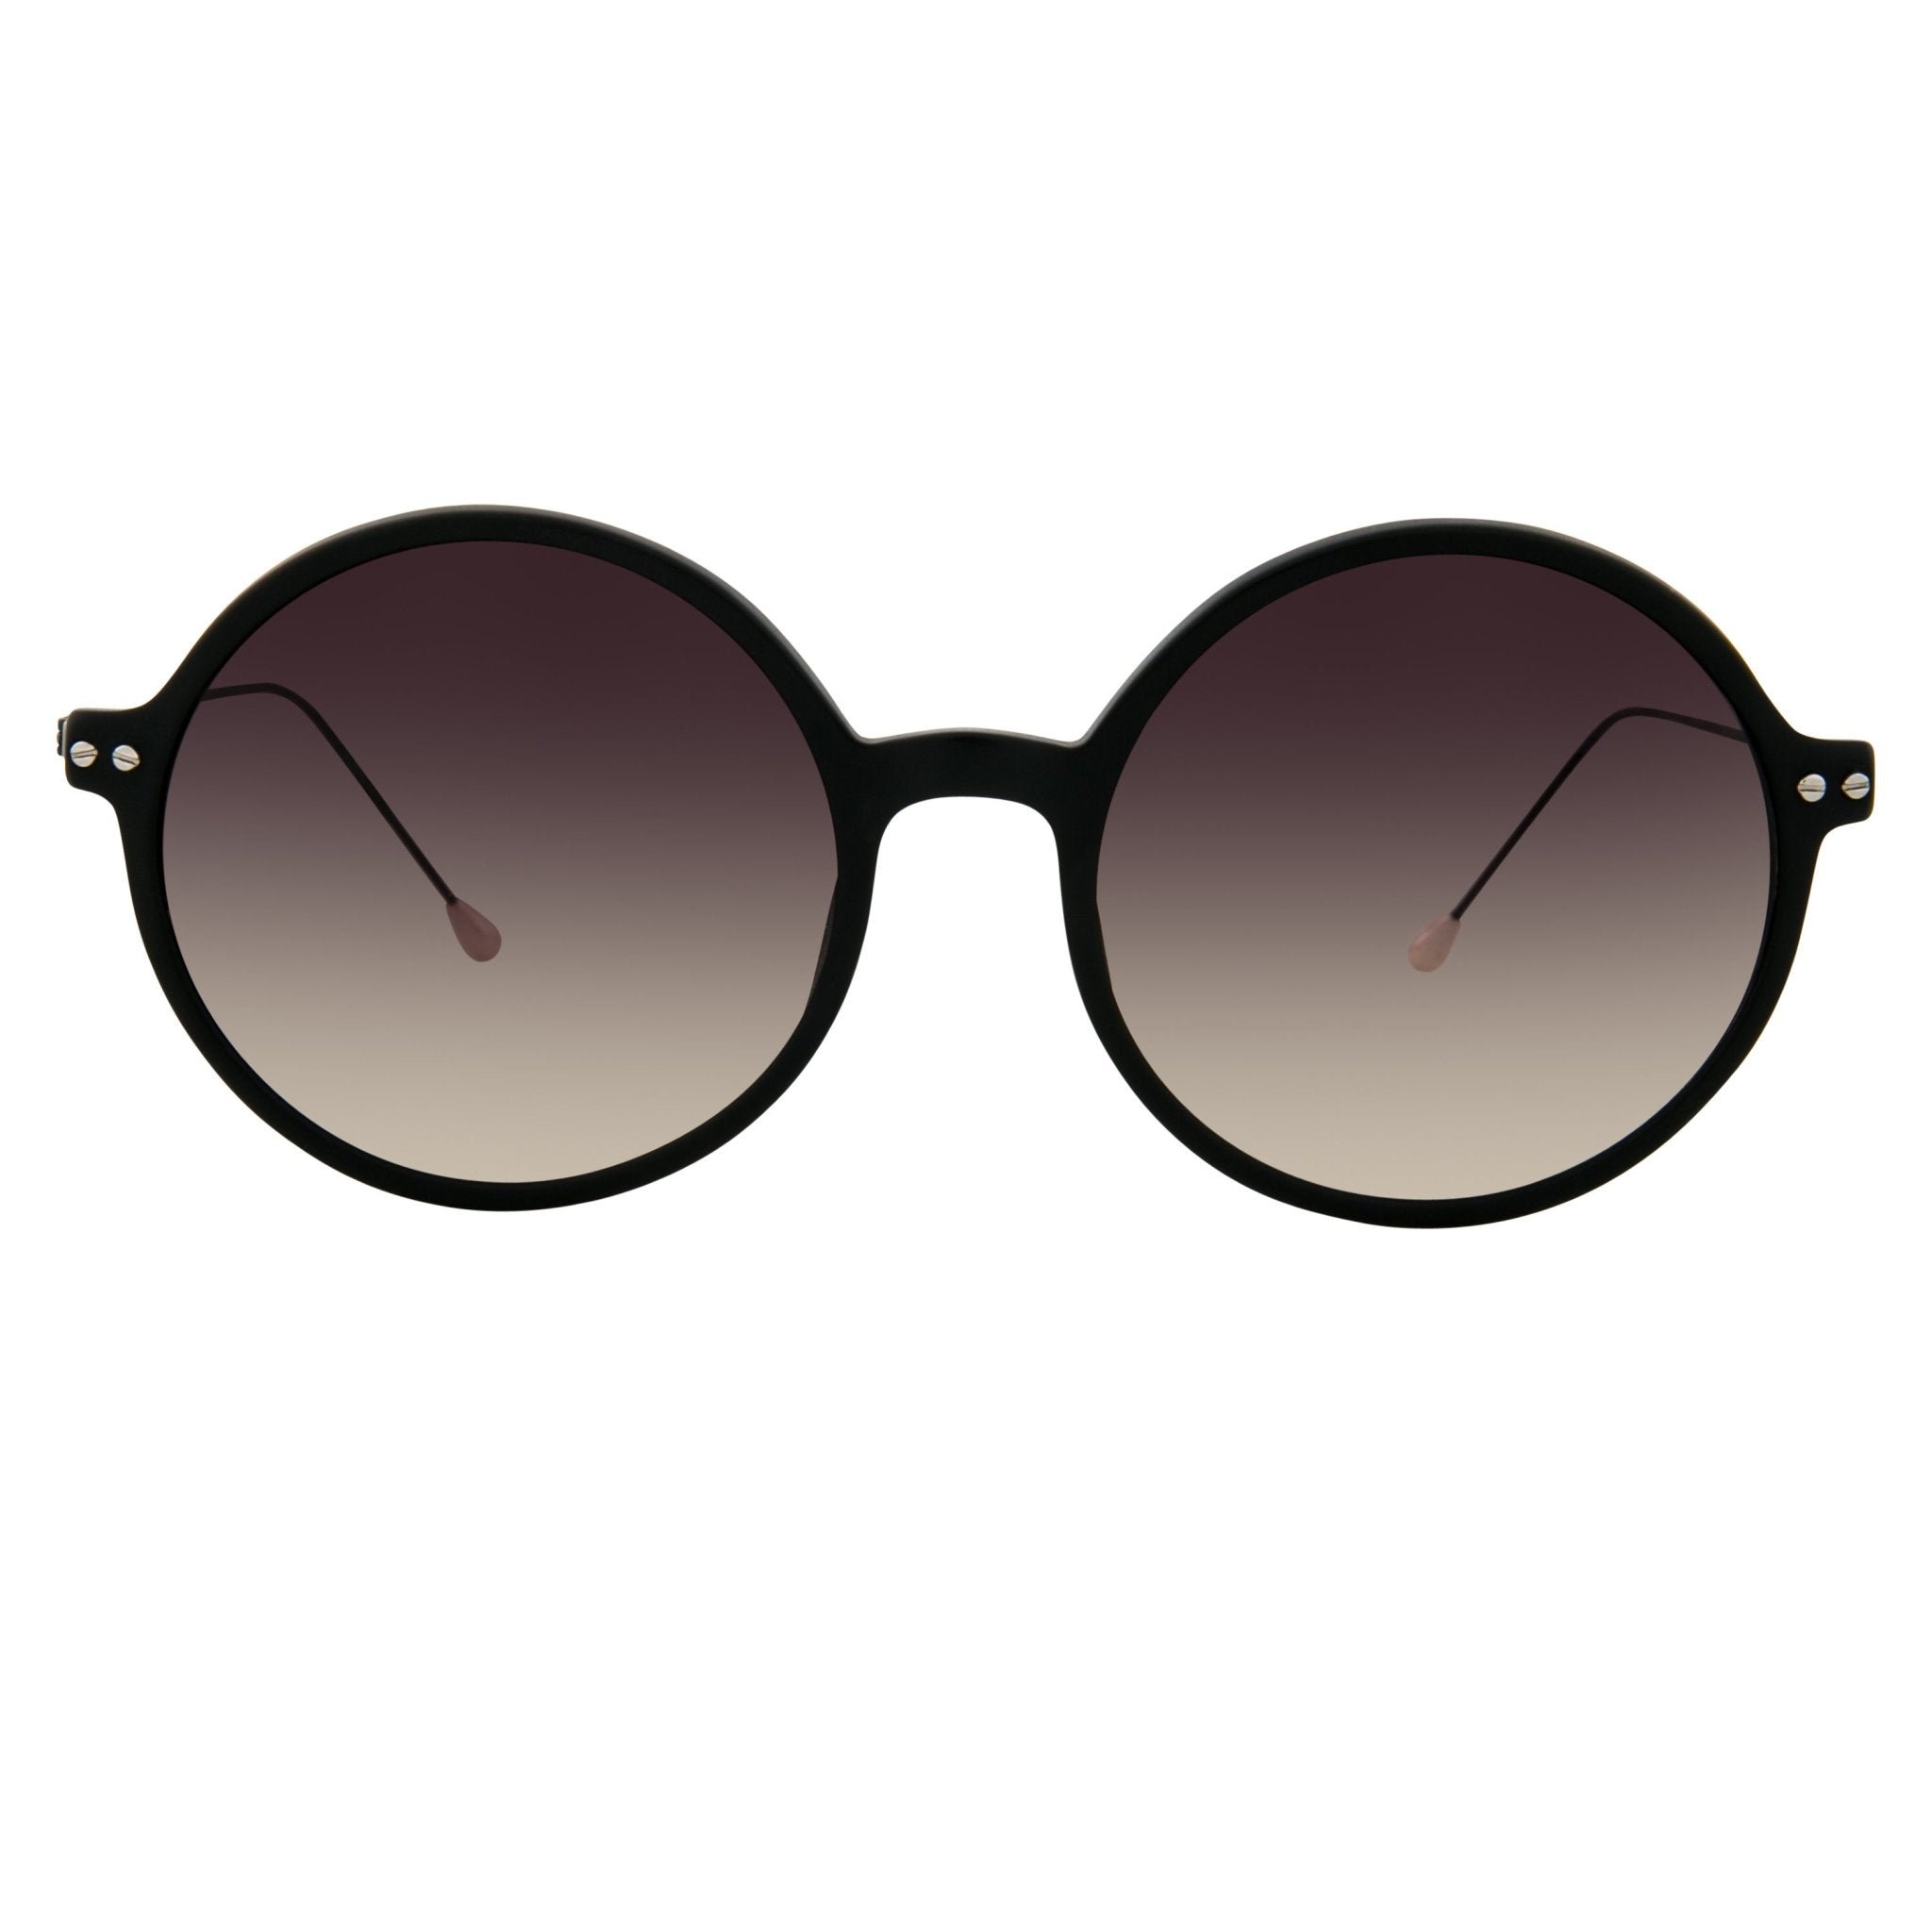 Ann Demeulemeester Sunglasses Round Matte Black 925 Silver with Grey Graduated Lenses CAT3 AD54C3SUN - Watches & Crystals